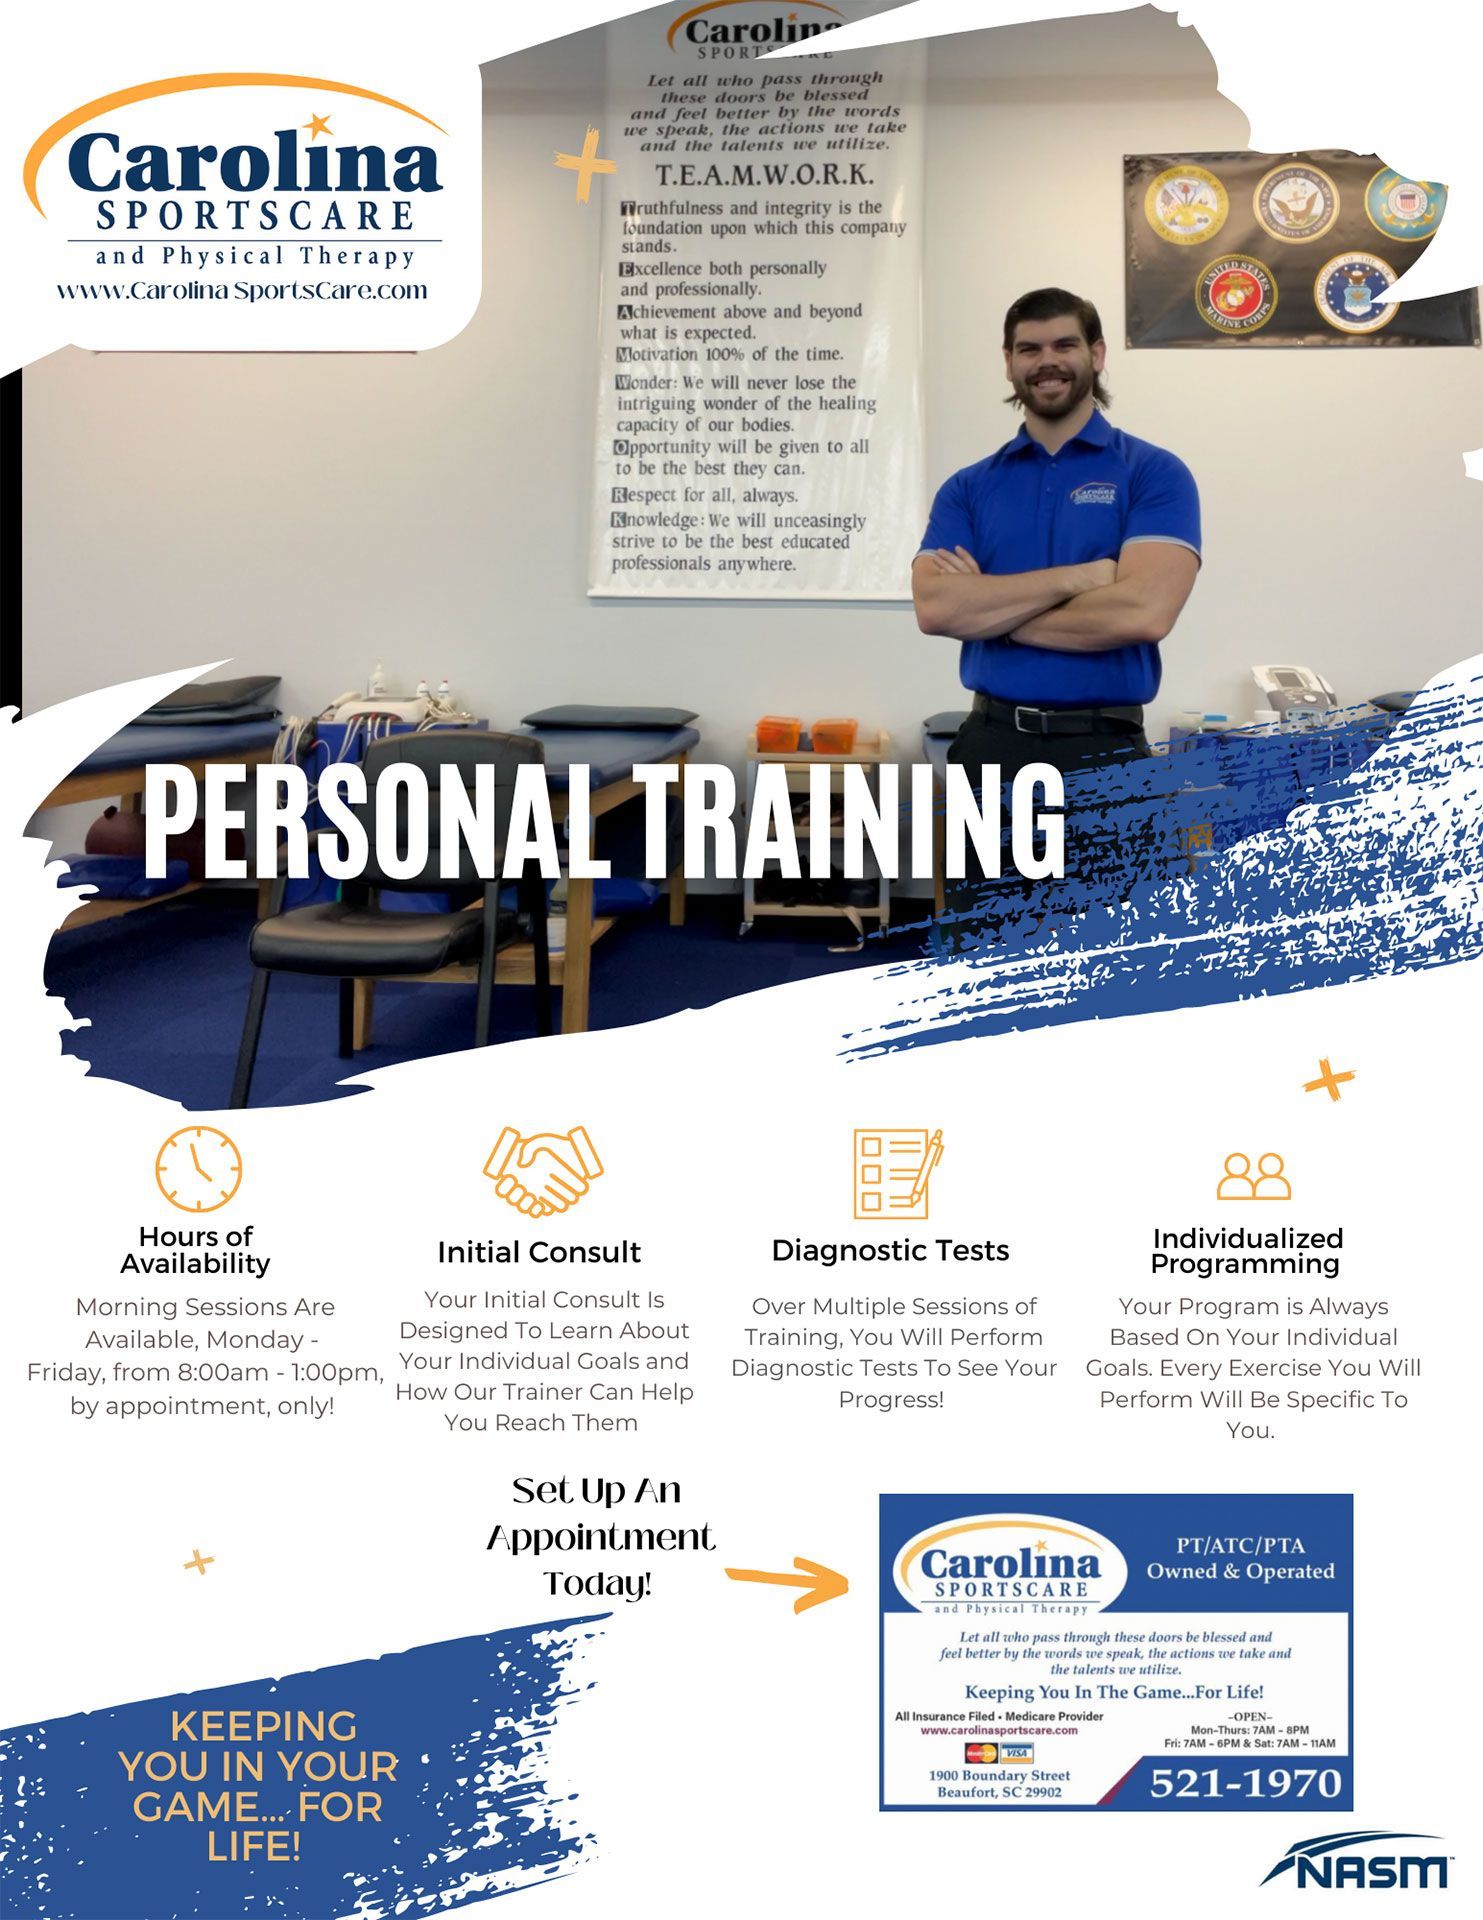 Personal training service flyer